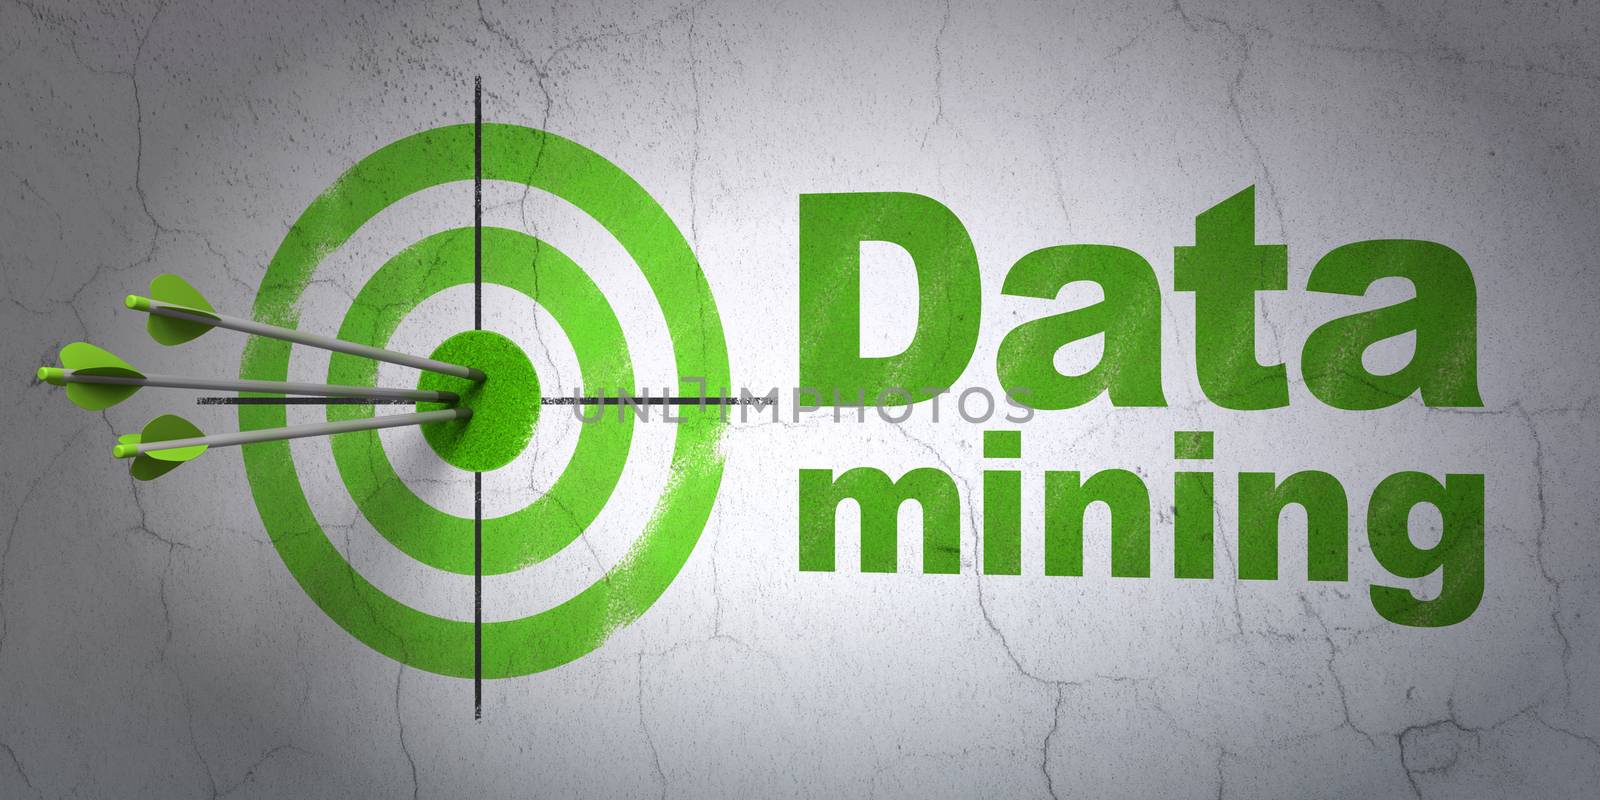 Success Data concept: arrows hitting the center of target, Green Data Mining on wall background, 3D rendering